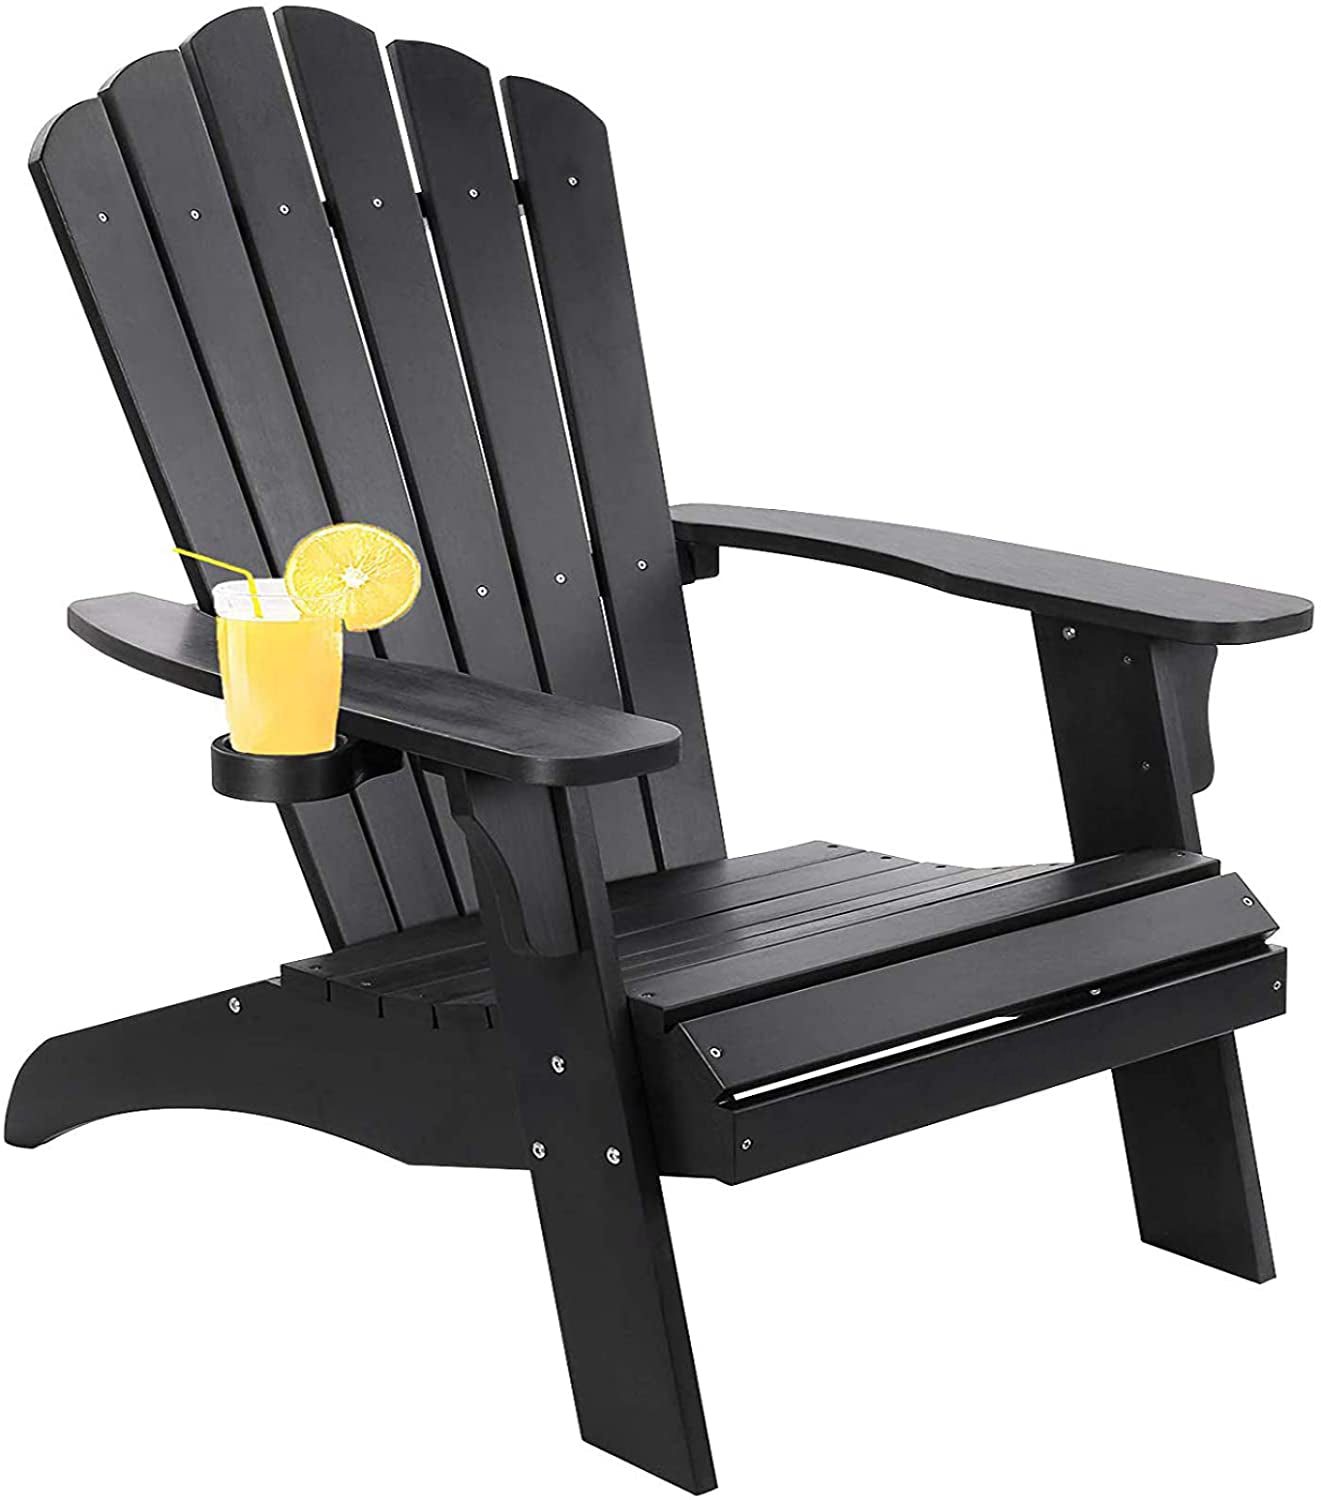 Polystyrene Composite Adirondack Chair With Cup Holder-Black